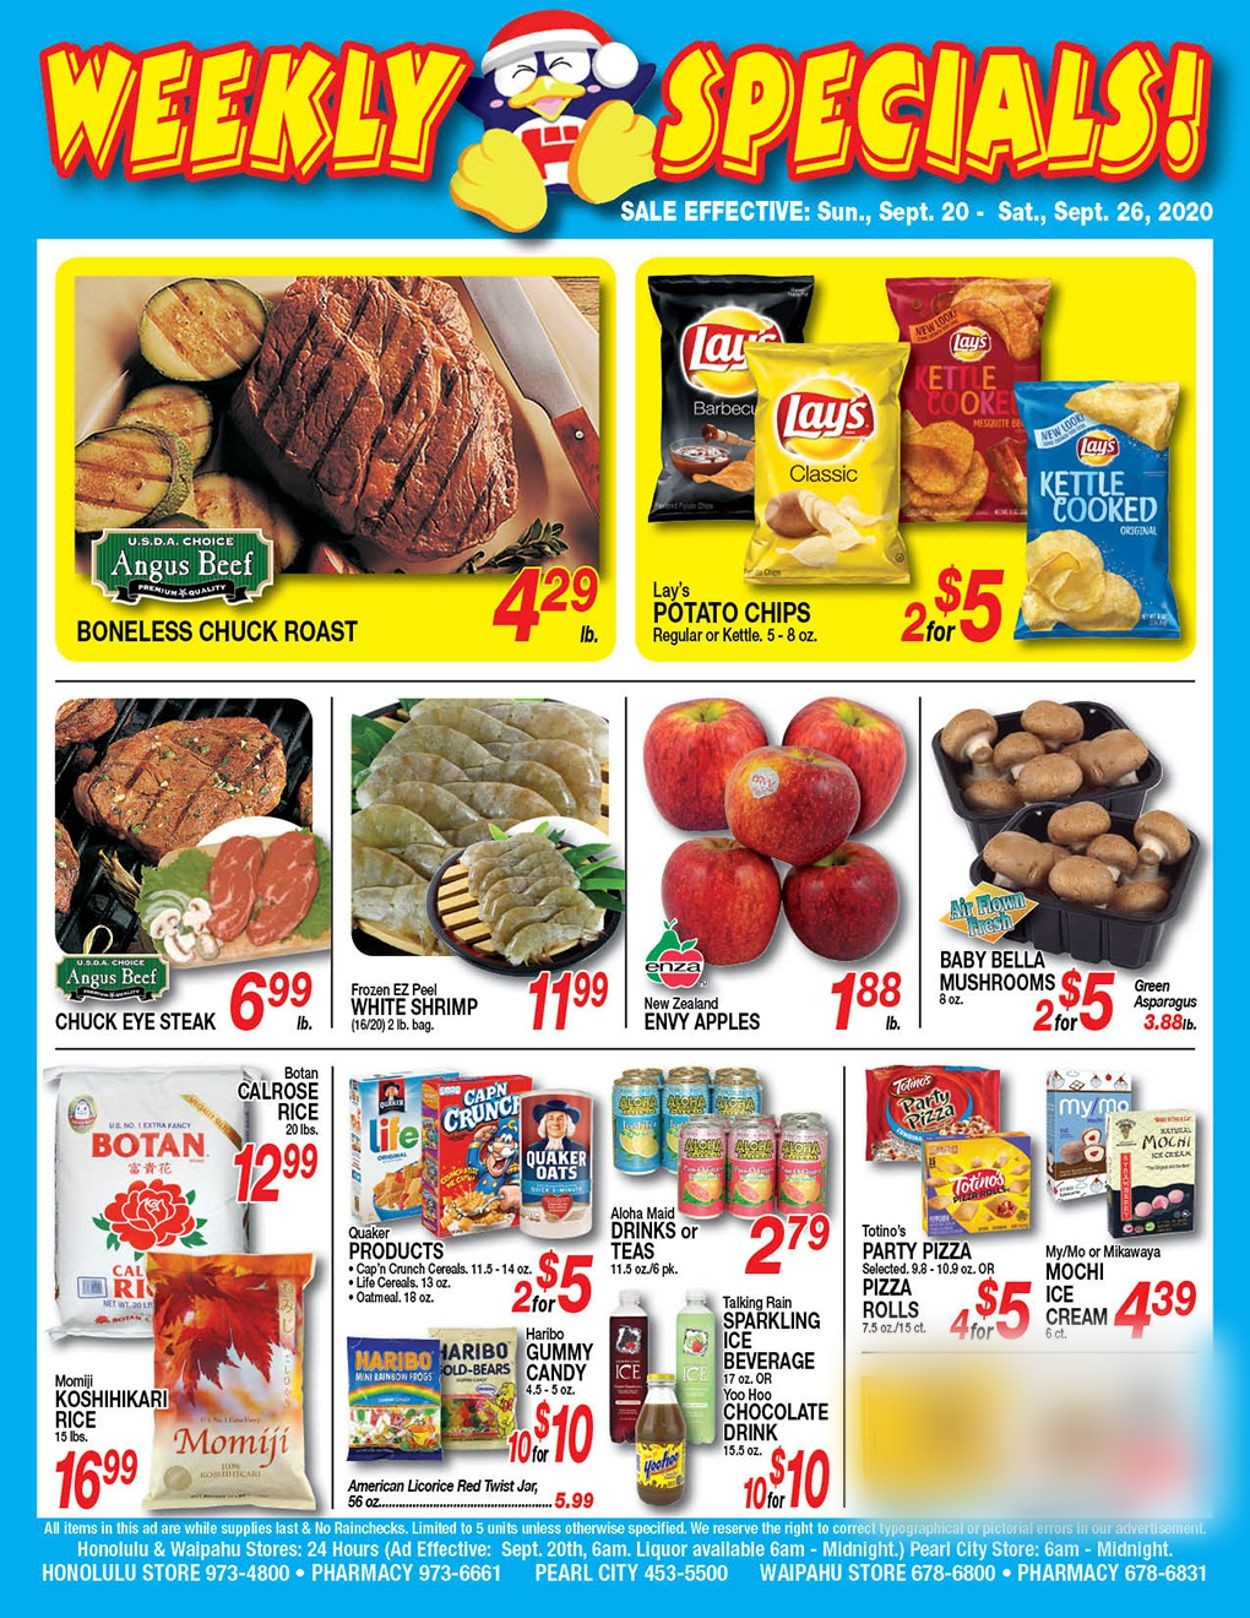 Don Quijote Hawaii Current weekly ad 09/20 09/26/2020 frequent ads com